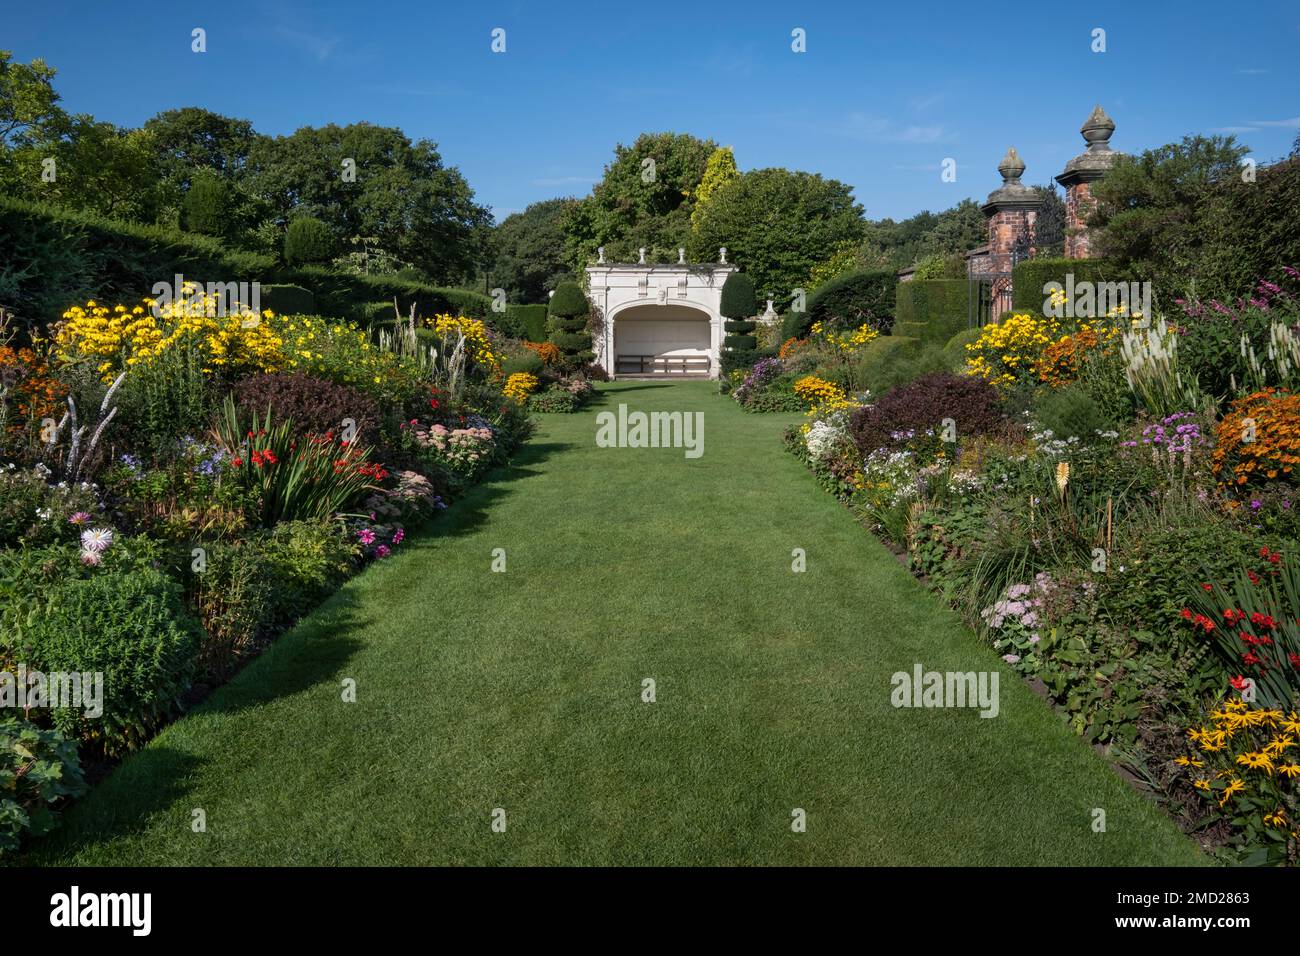 The Double Herbaceous Borders in summer, Arley Hall & Gardens, Arley, Cheshire, England, UK Stock Photo